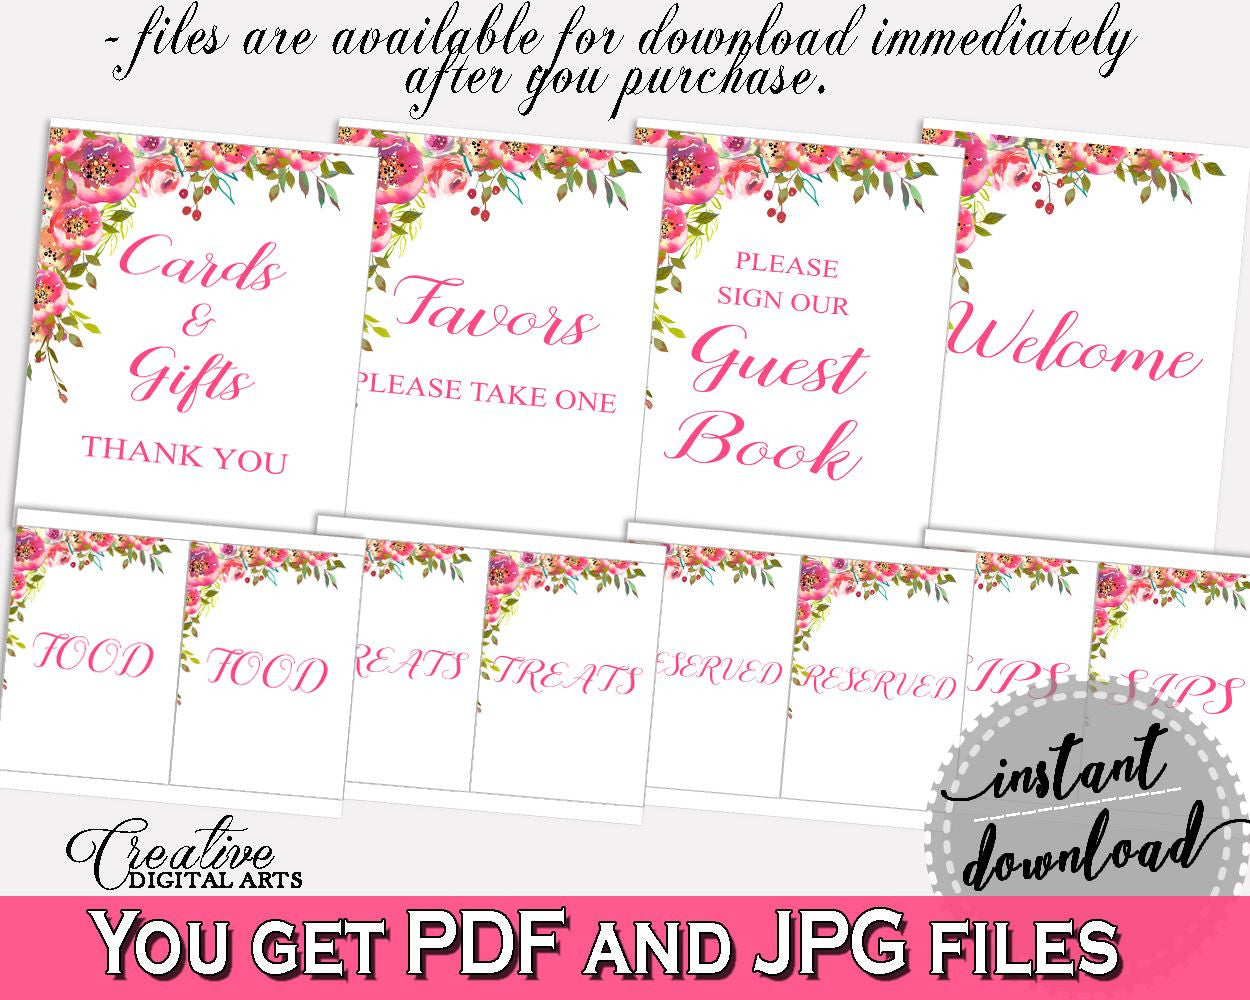 Table Signs Bridal Shower Table Signs Spring Flowers Bridal Shower Table Signs Bridal Shower Spring Flowers Table Signs Pink Green pdf UY5IG - Digital Product